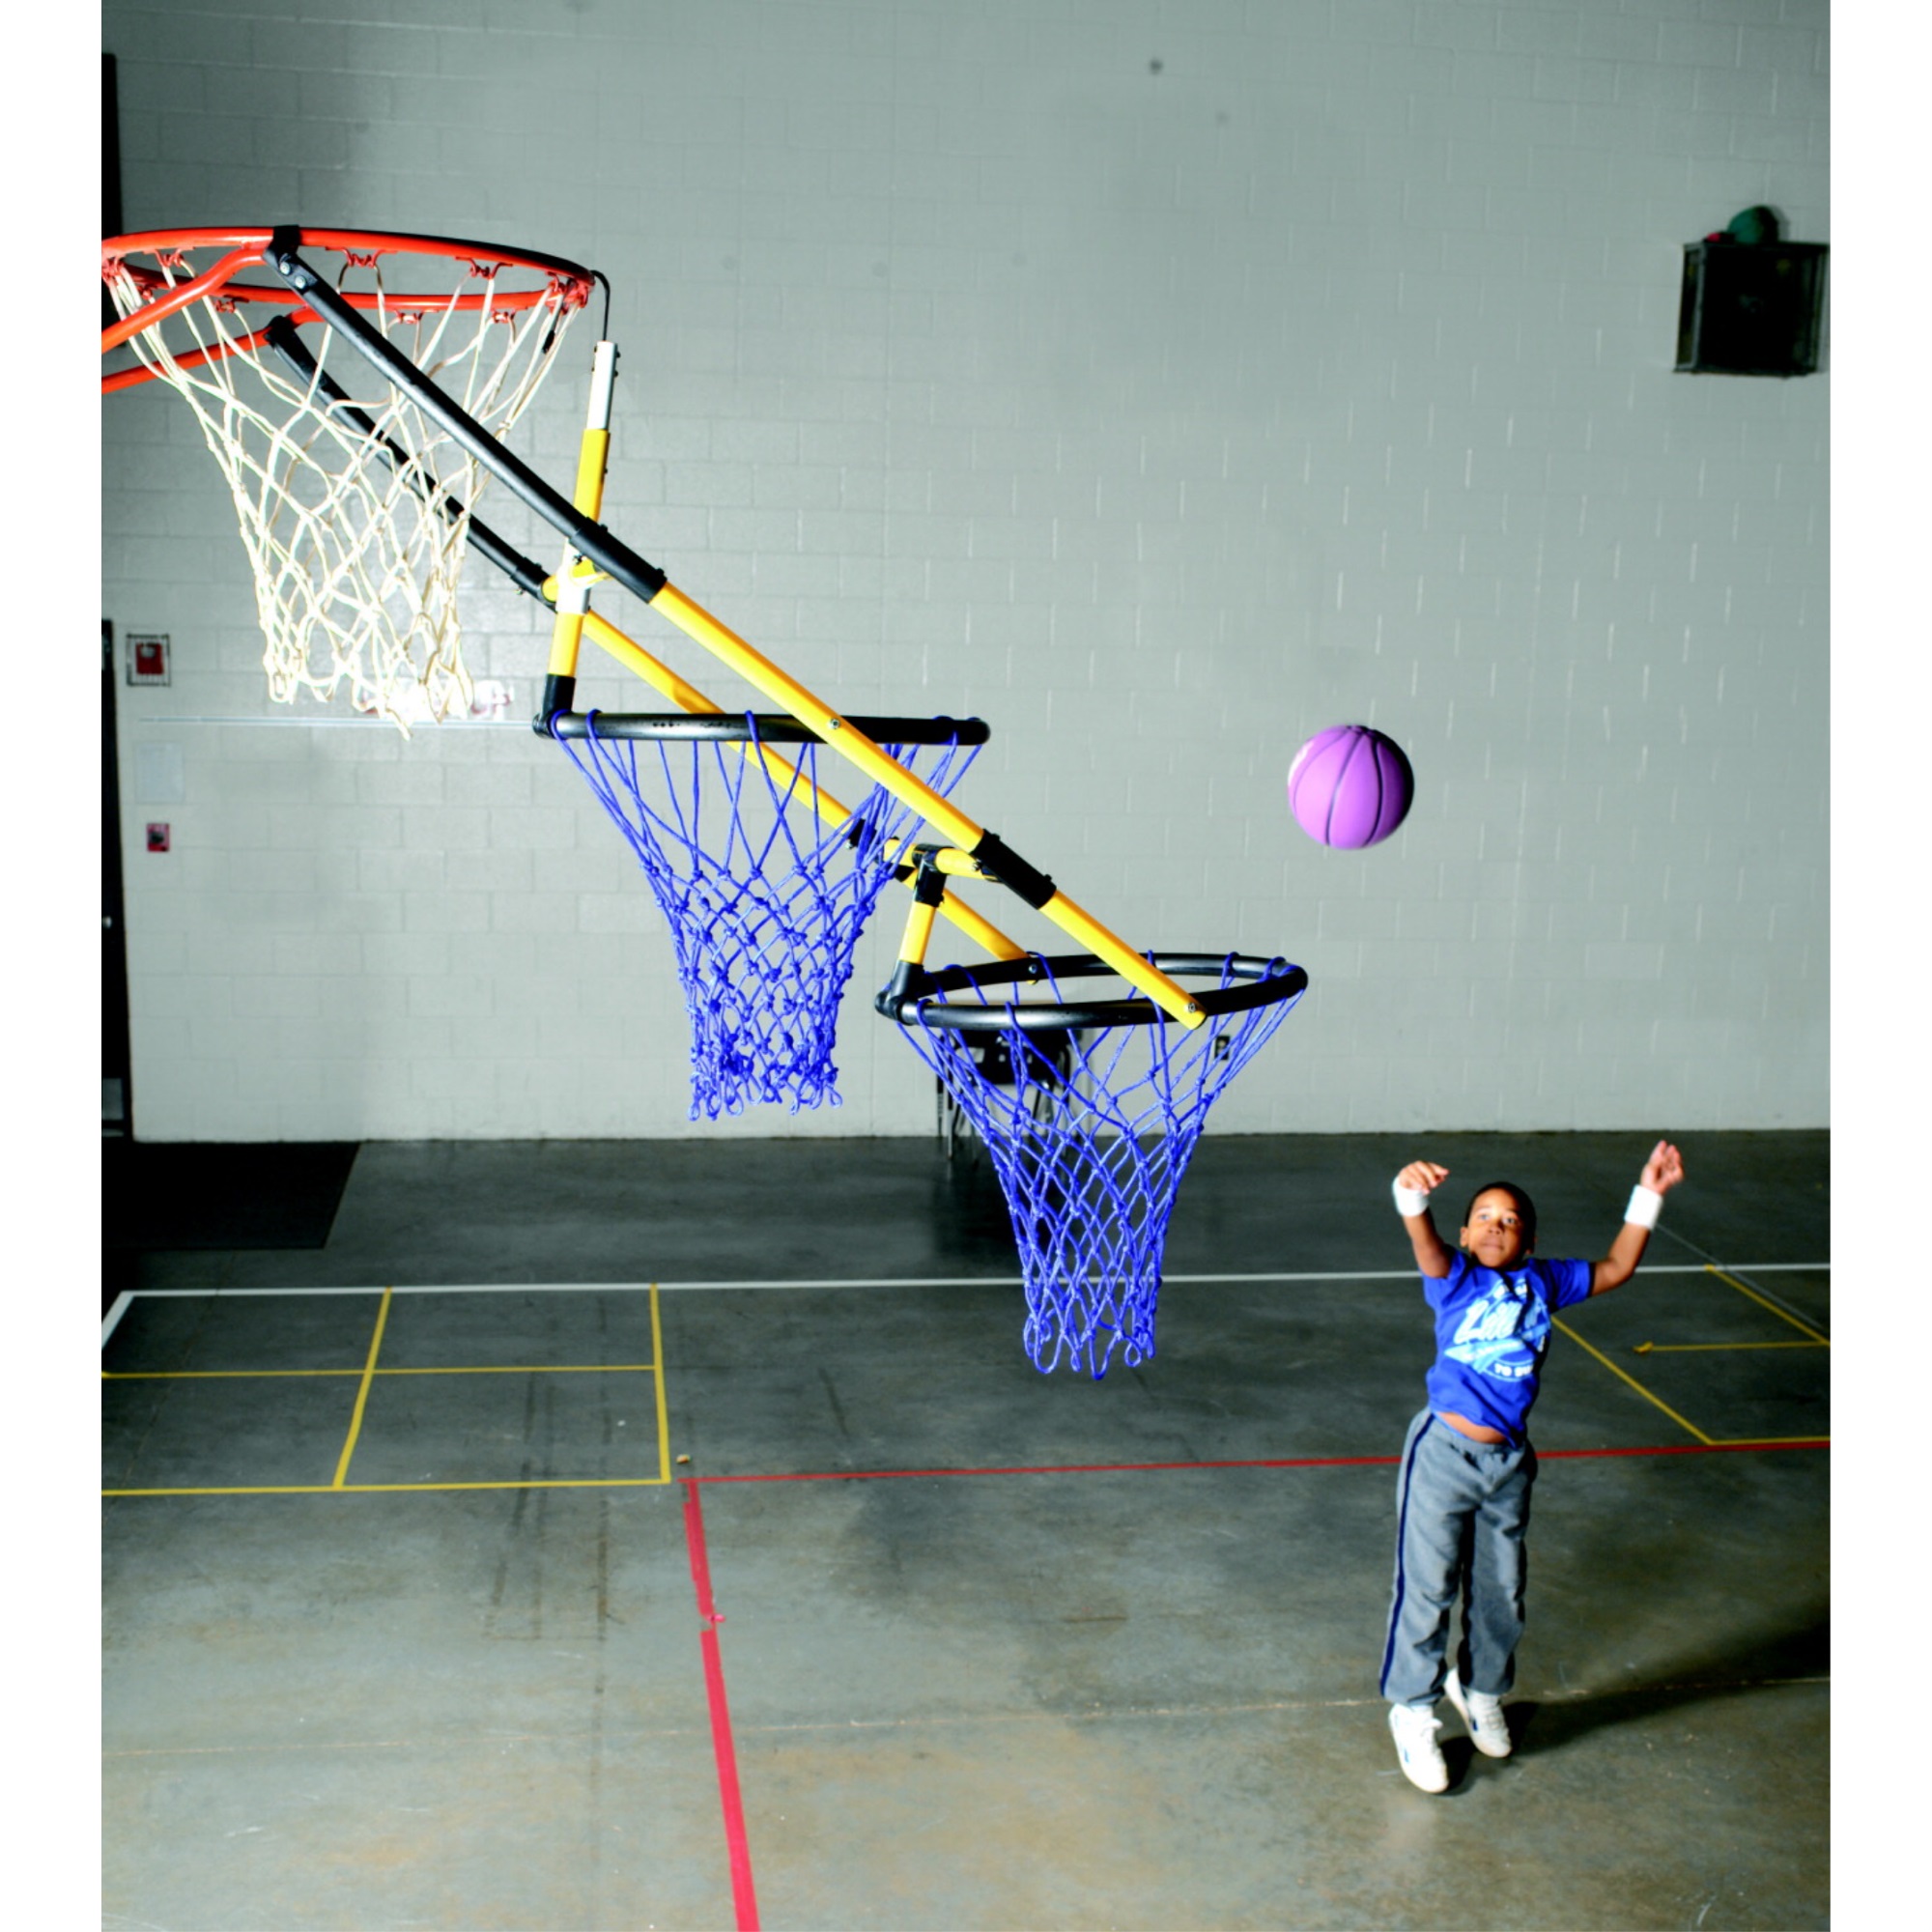 Sportime Tierdrop Two-Hoop Basketball Goal Nets, 18 Inches